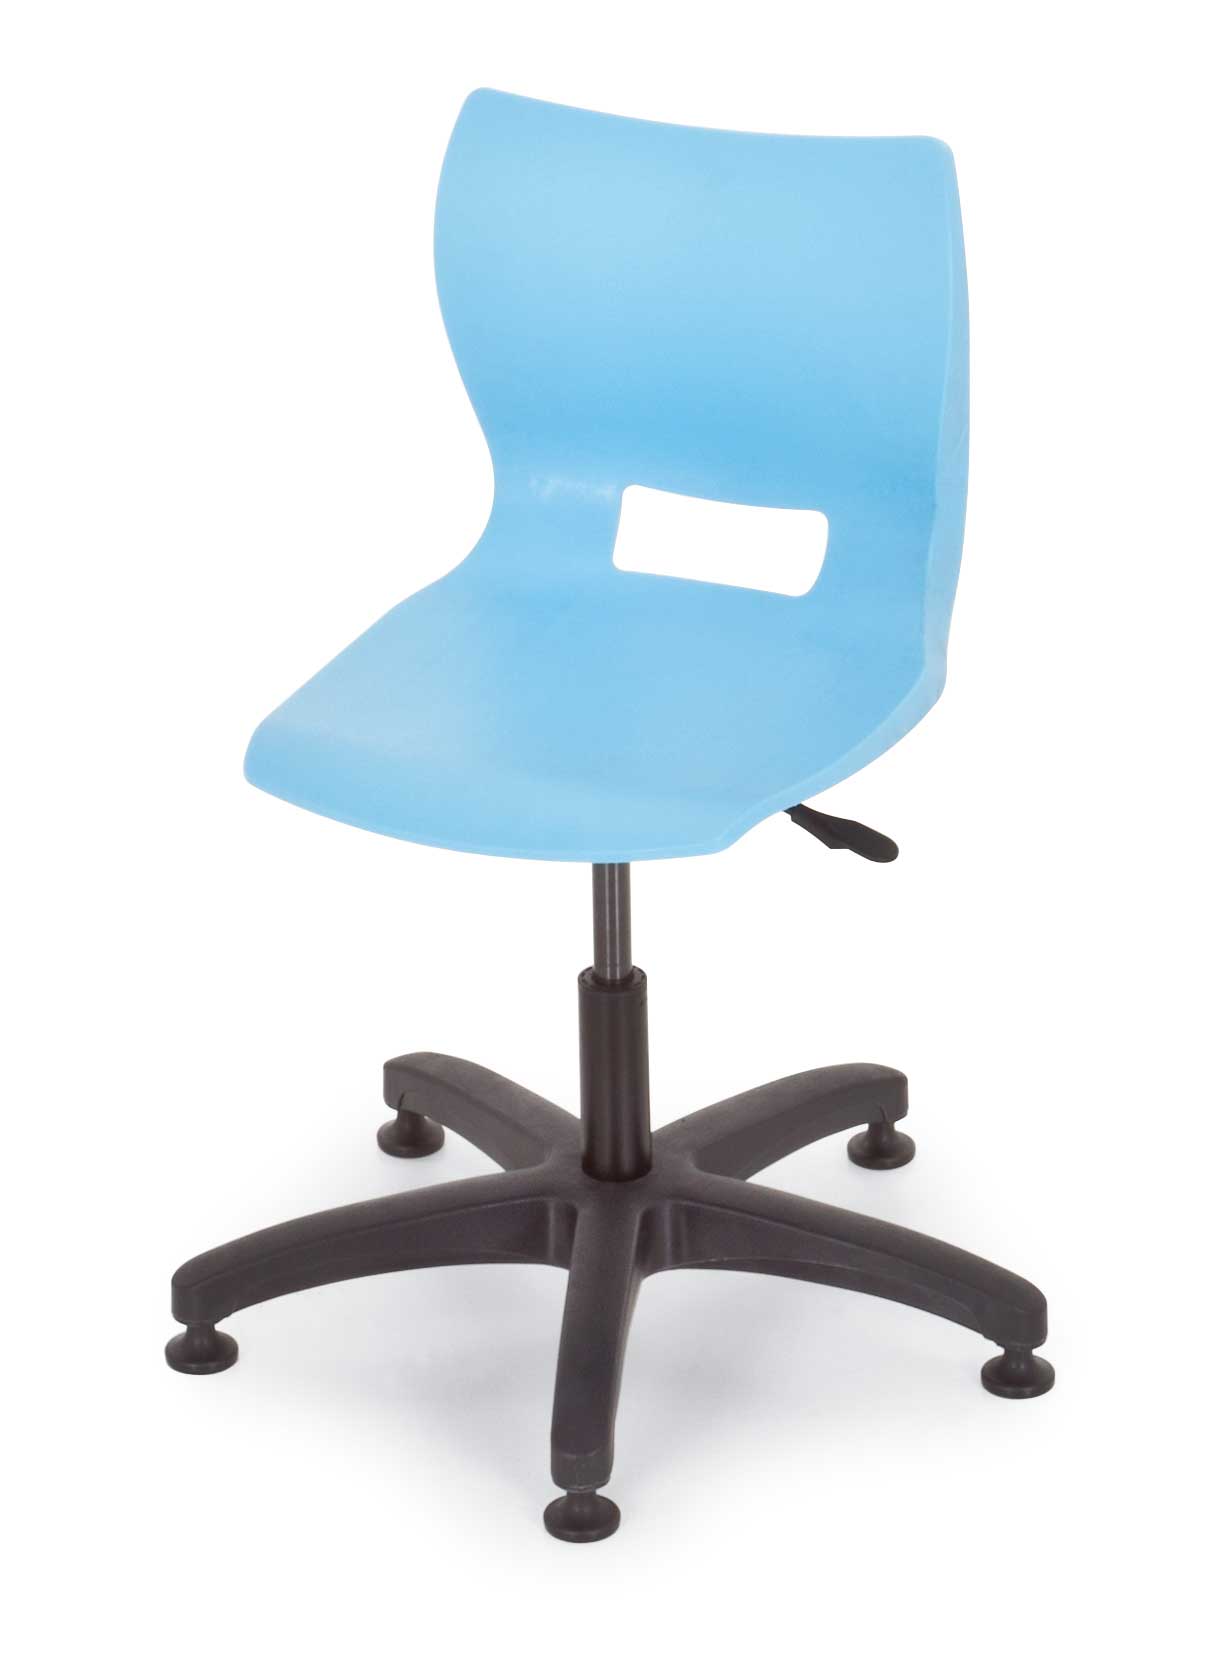 adjustable height chair